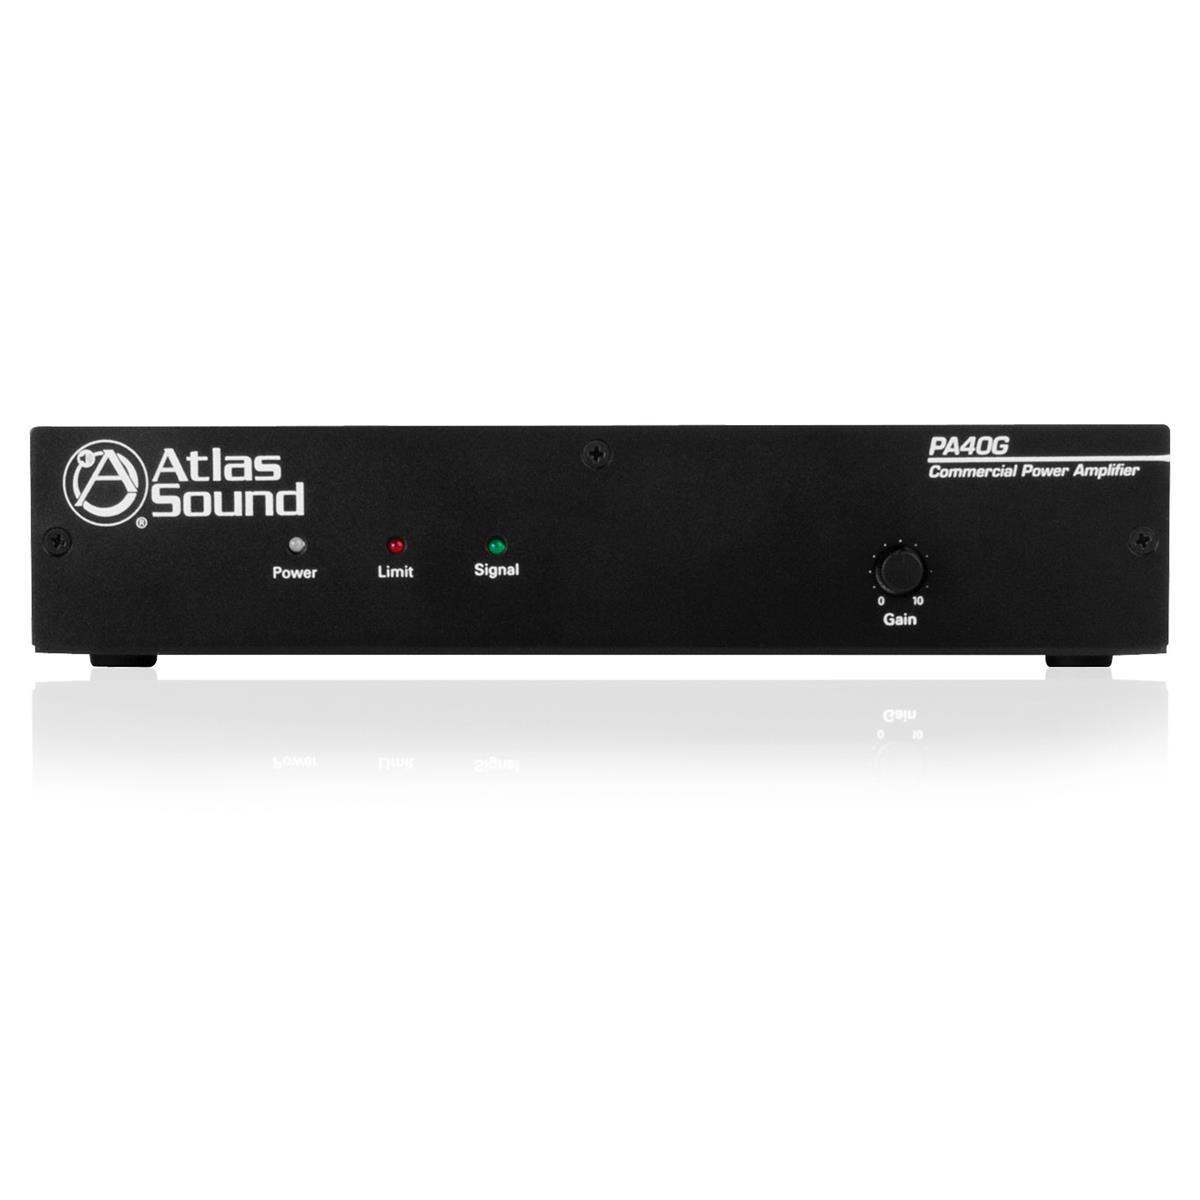 Image of Atlas Sound PA40G 40W Single Channel Commercial Power Amplifier